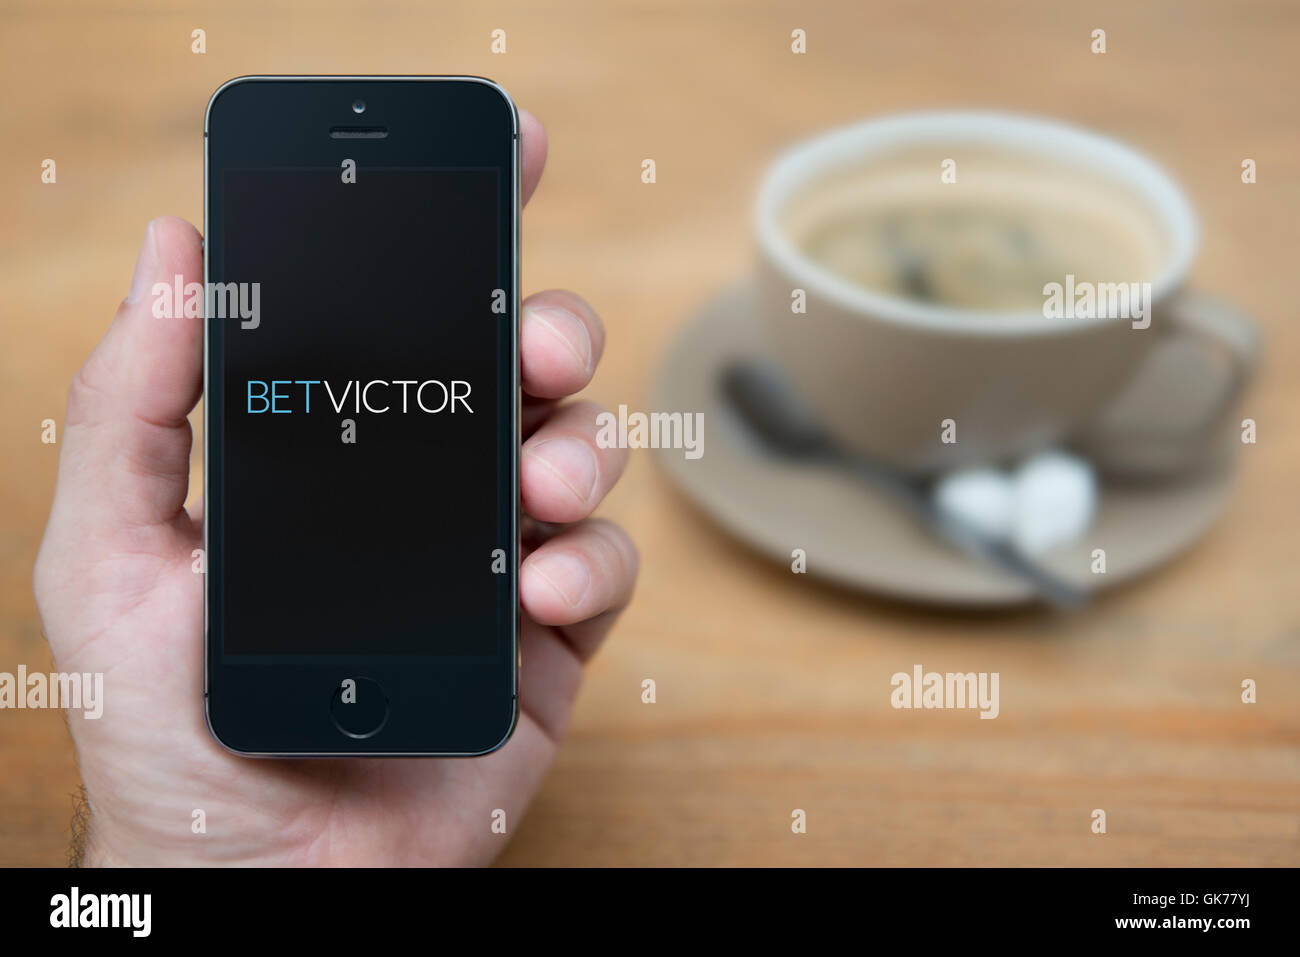 A man looks at his iPhone which displays the Bet Victor logo, while sat with a cup of coffee (Editorial use only). Stock Photo